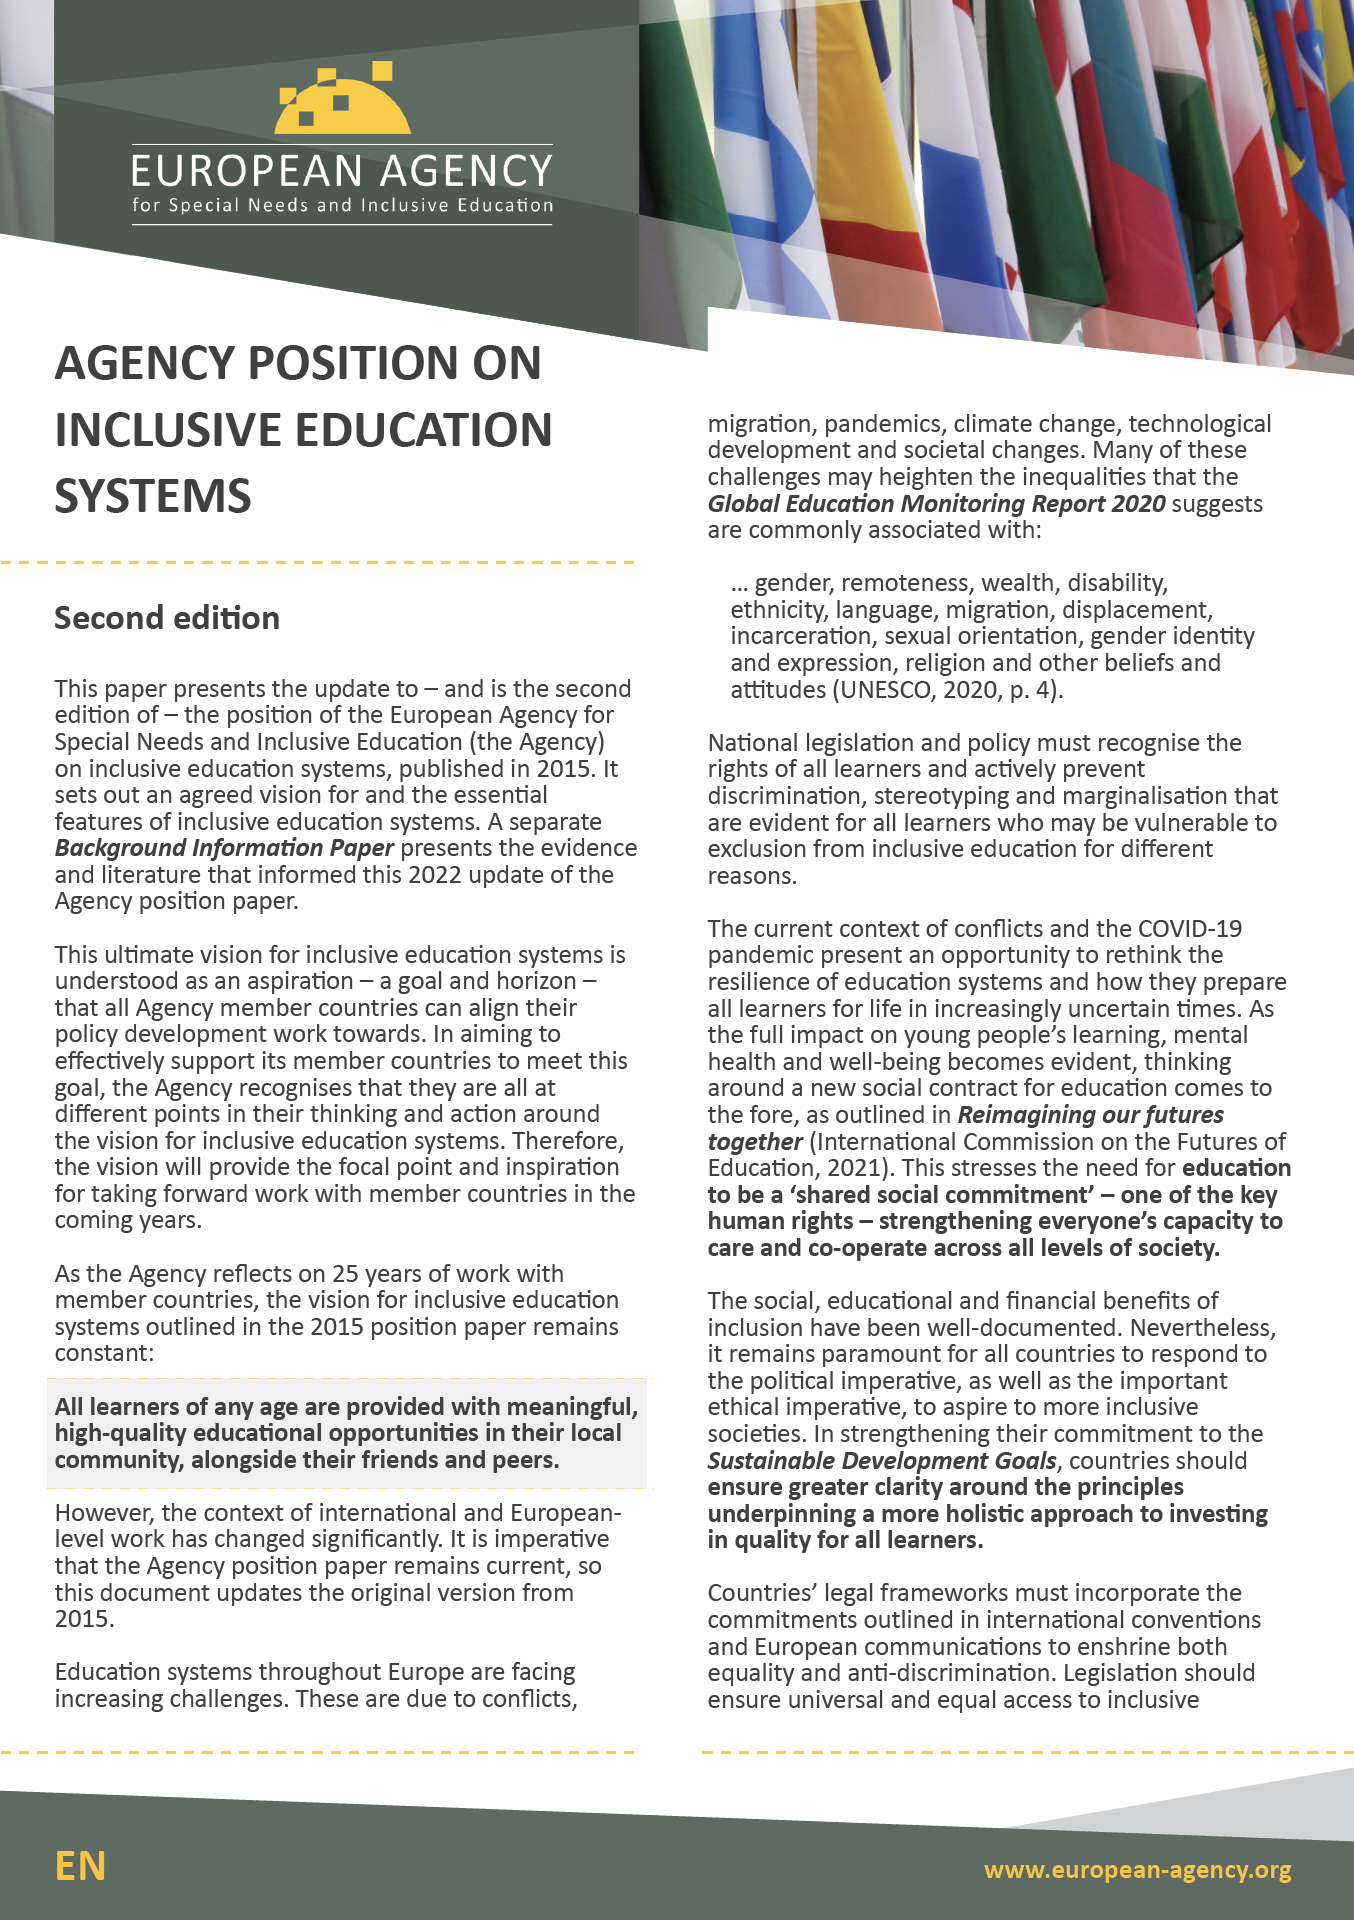 Agency position on inclusive education systems – Second edition